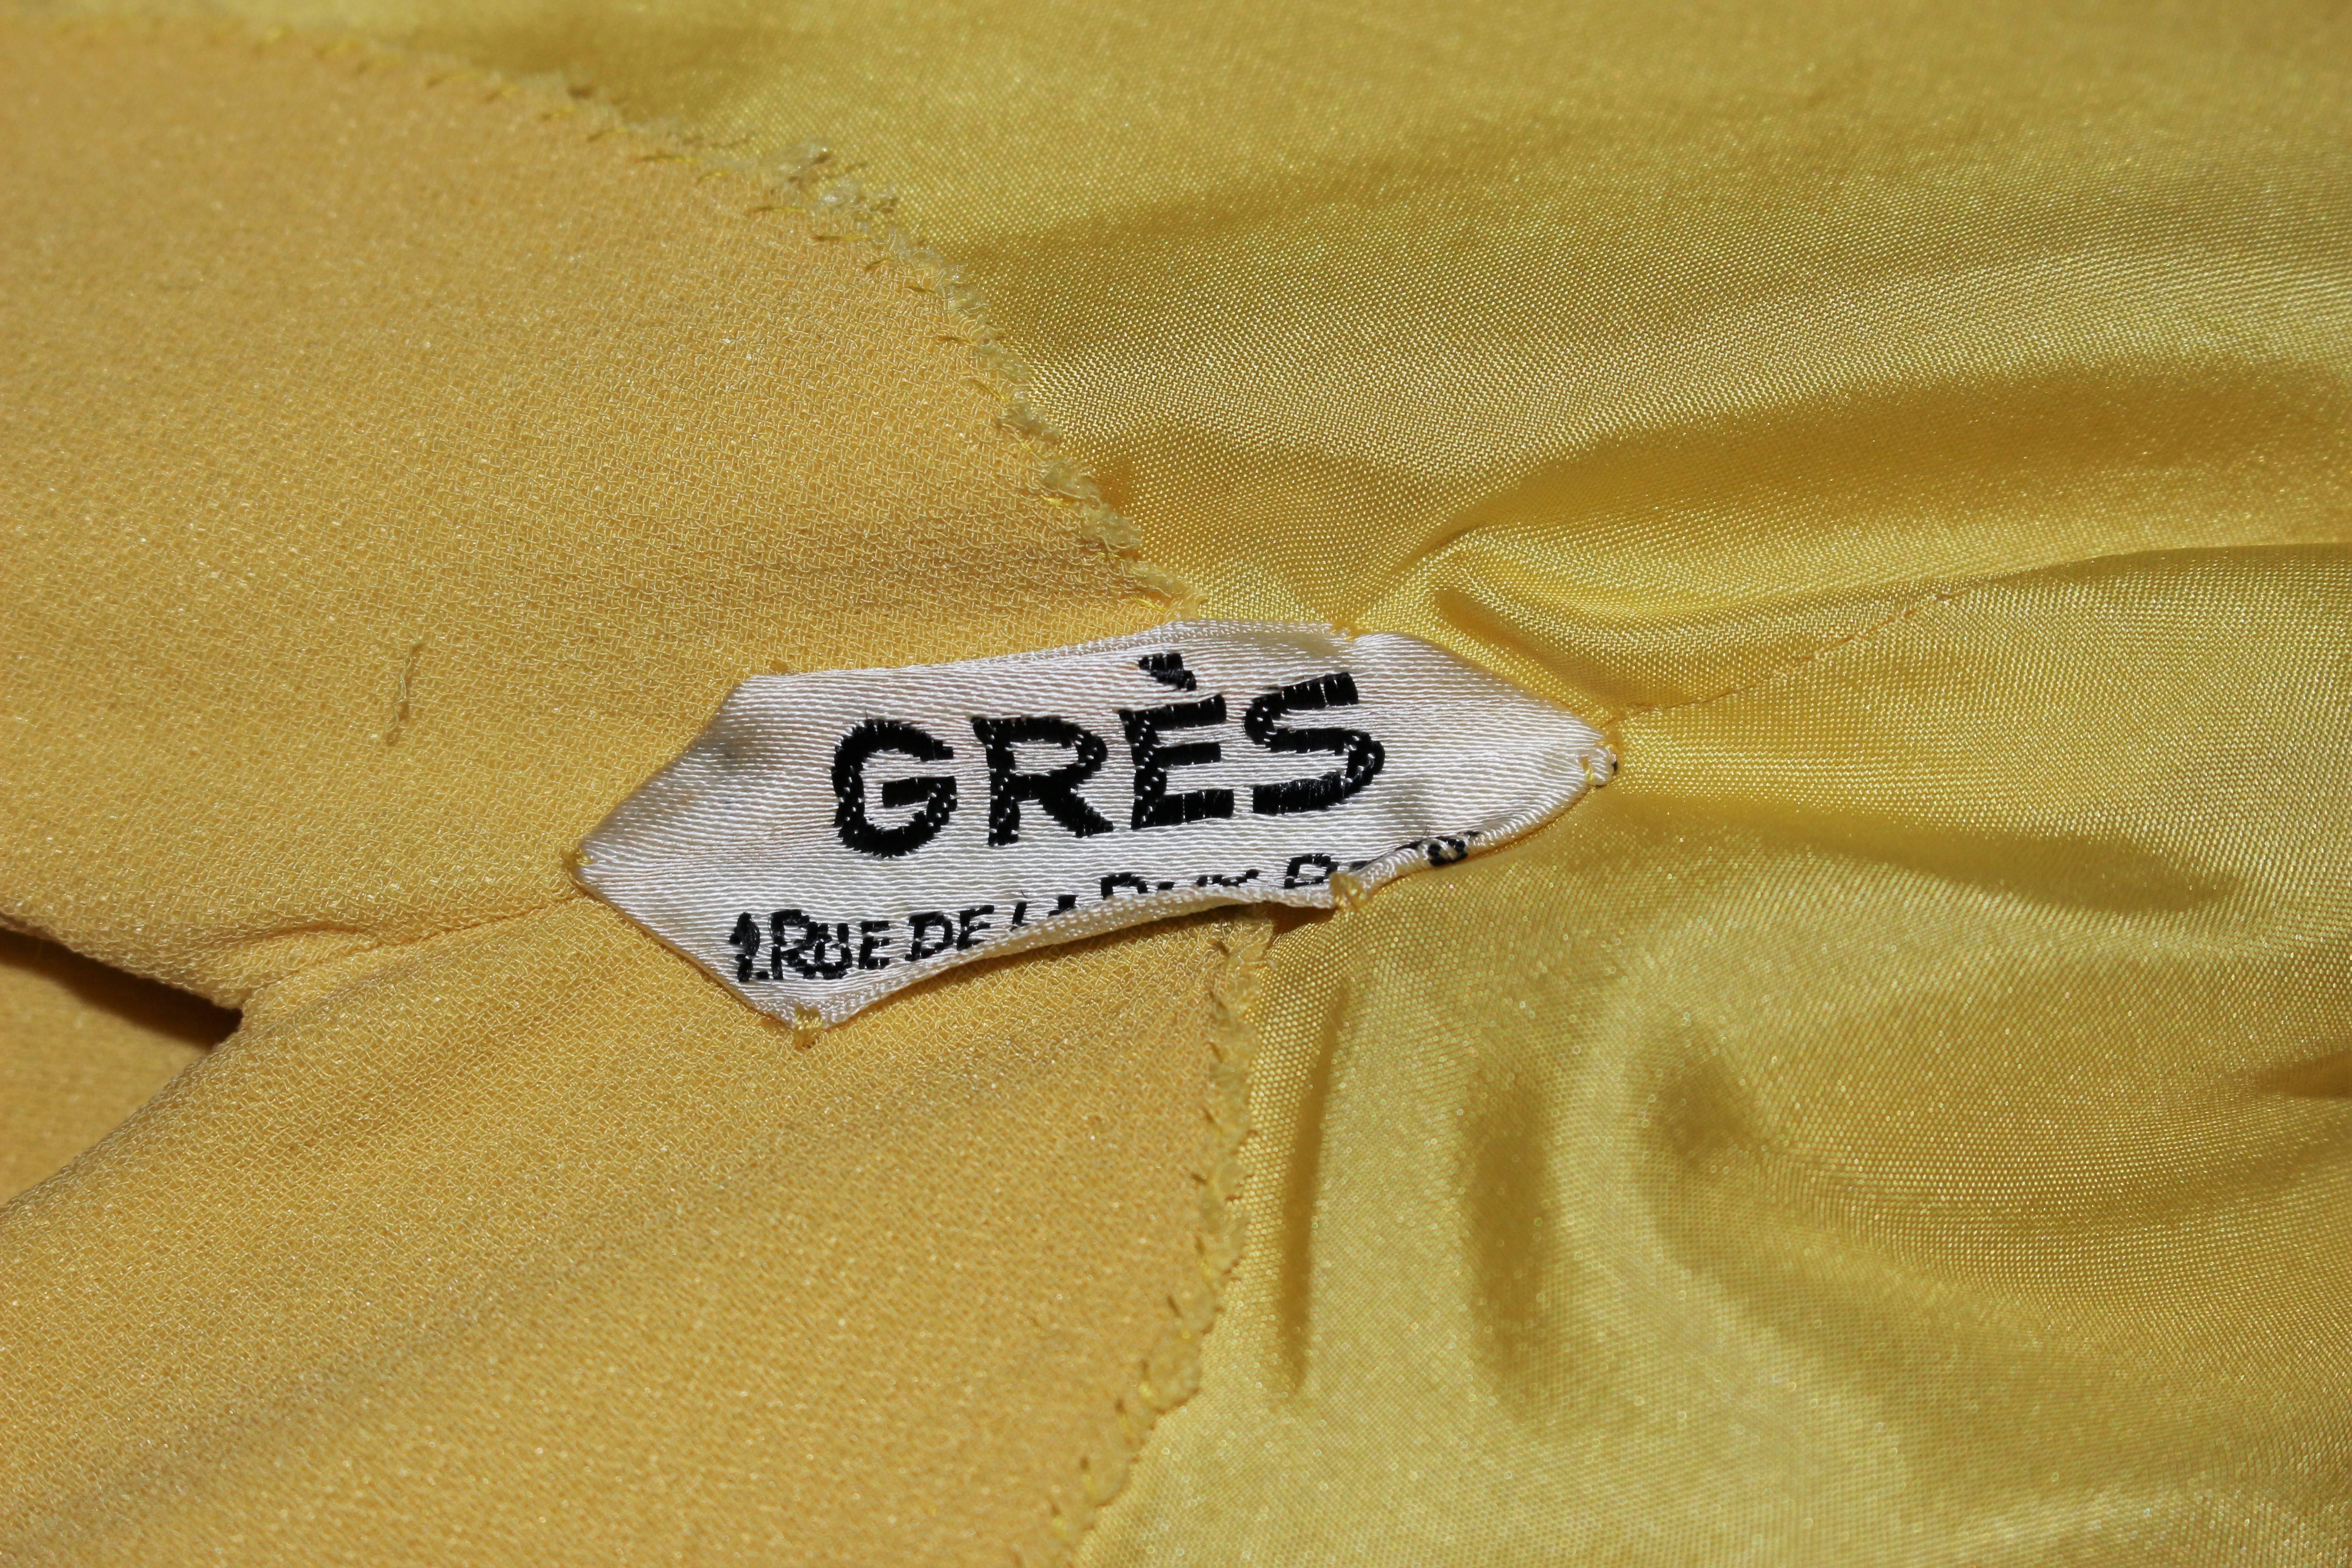 MADAME GRES HAUTE COUTURE Betsy Bloomingdale 1960's Yellow Asymmetrical Gown For Sale 2